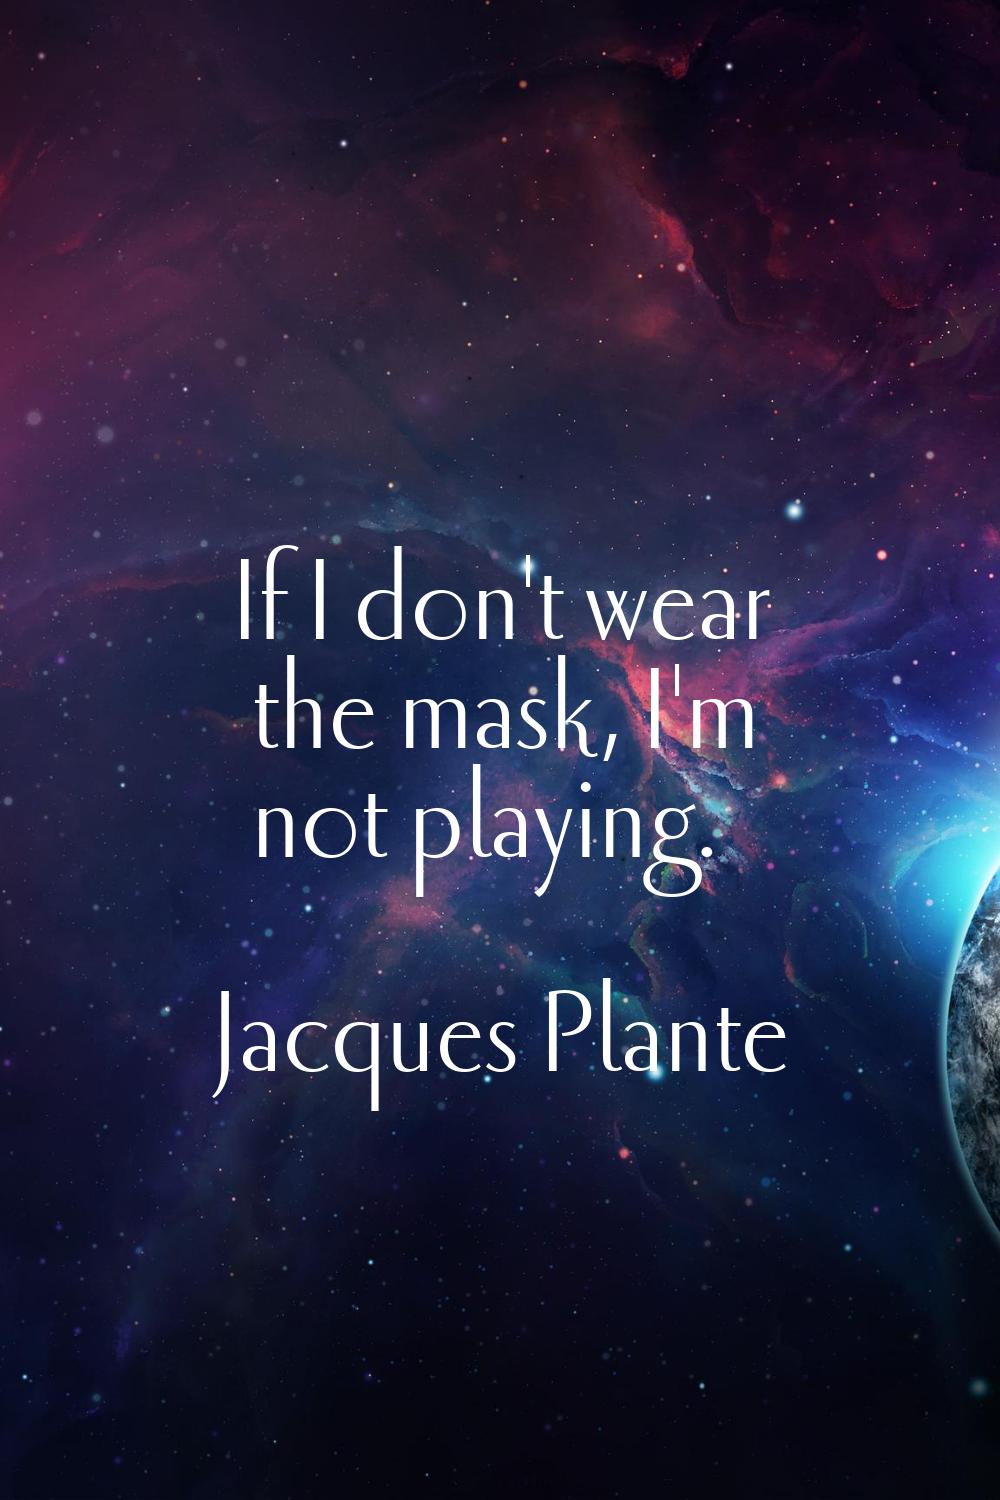 If I don't wear the mask, I'm not playing.